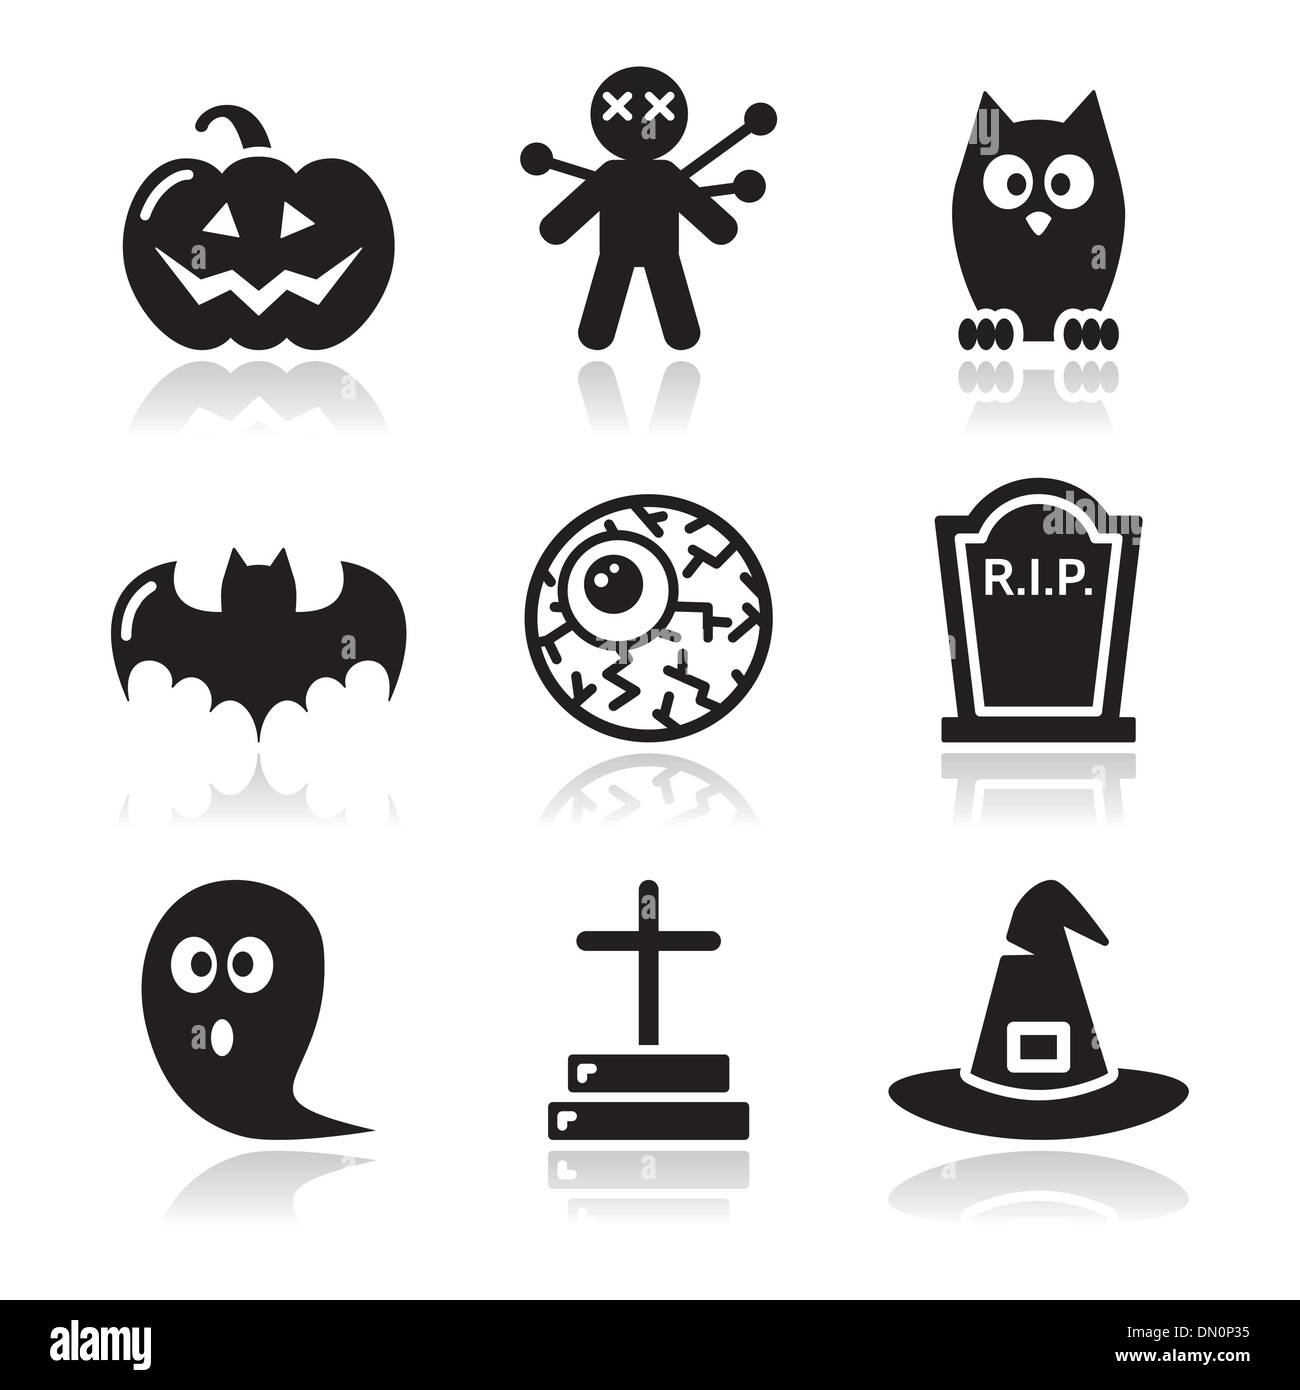 Halloween black icons set - pumpkin, witch, ghost Stock Vector